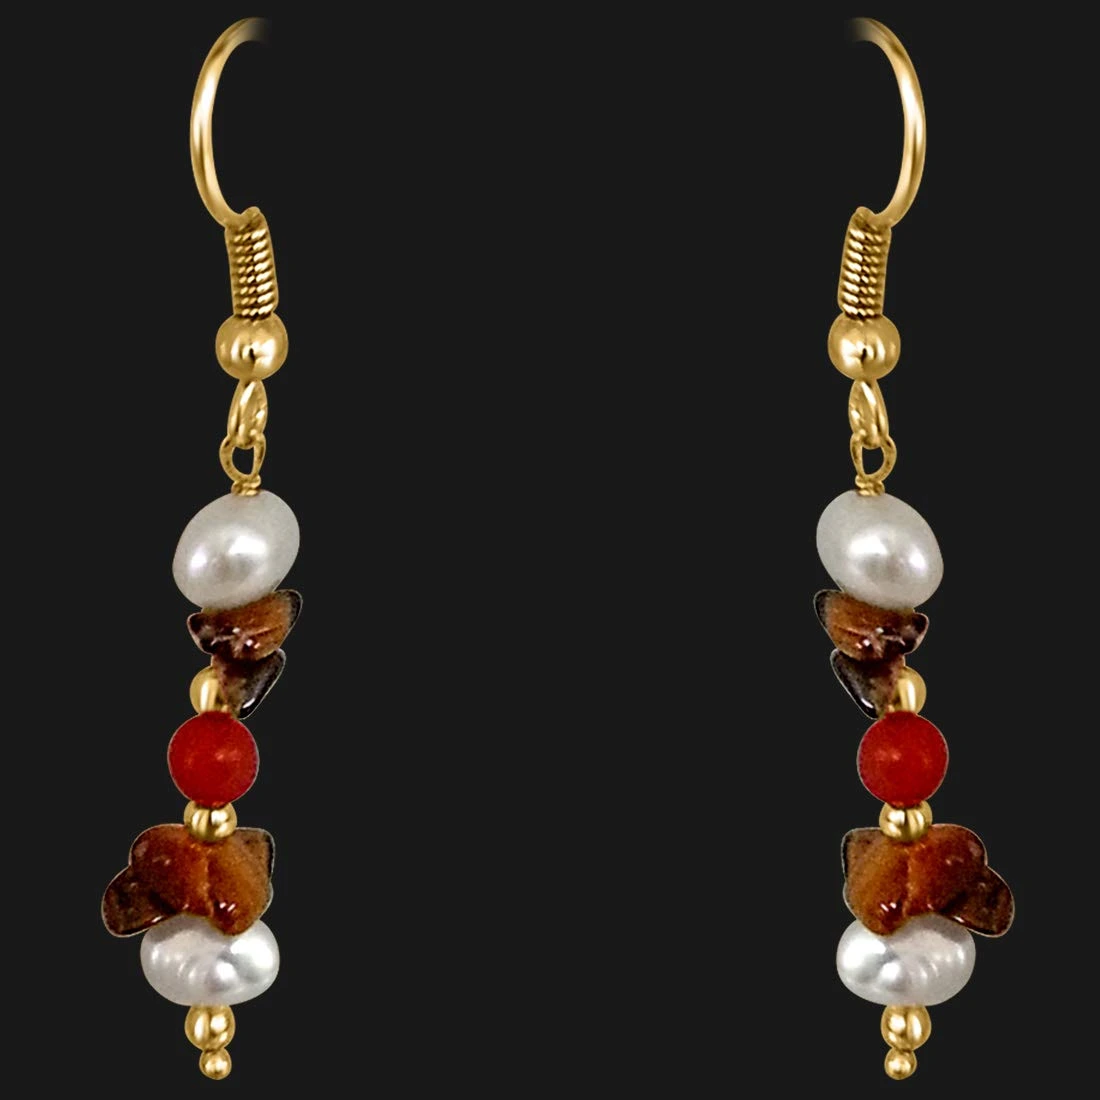 Real Tiger Eye, Coral & Pearl Hanging Earrings for Women (SE207)